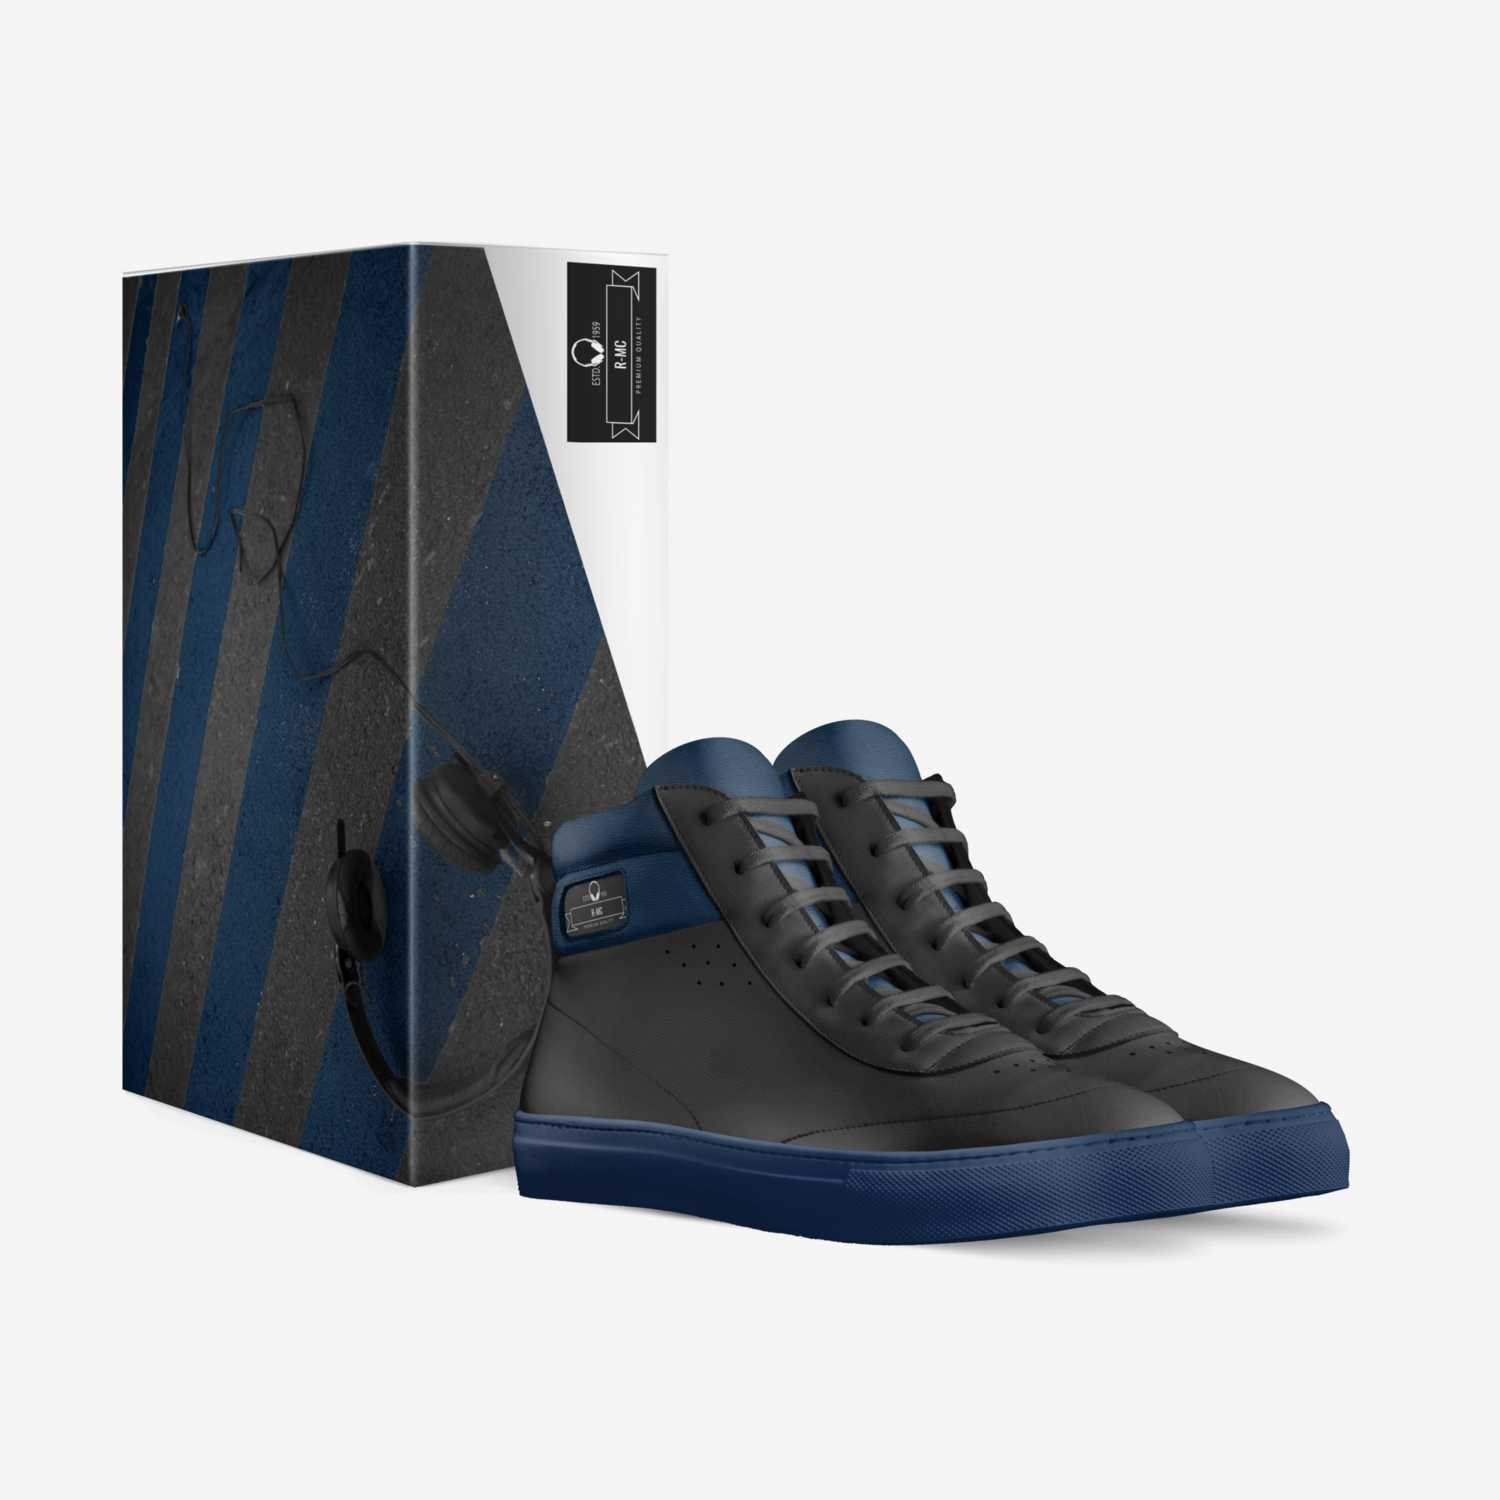 R-Mc custom made in Italy shoes by Ruben Mccullum | Box view